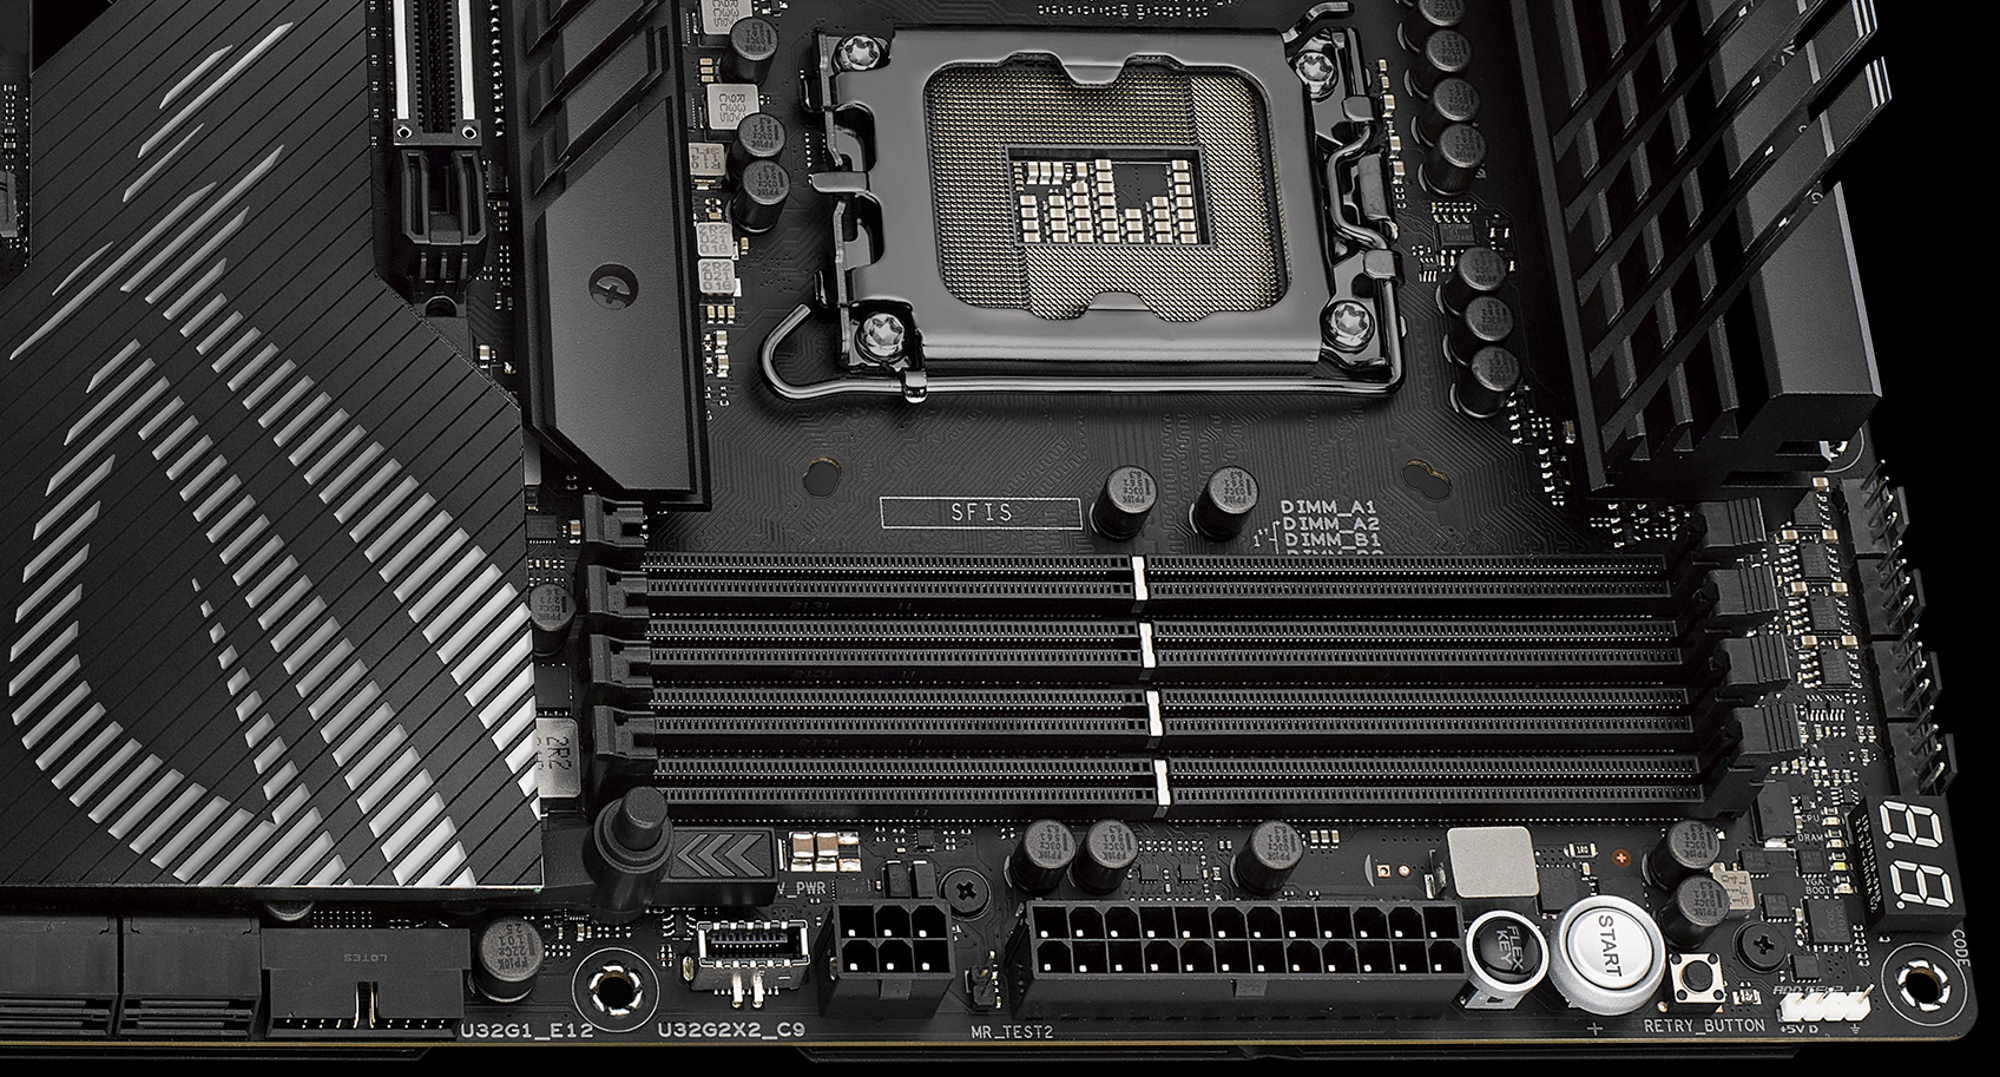 Reign supreme with ROG and ROG Strix Z790 gaming motherboards